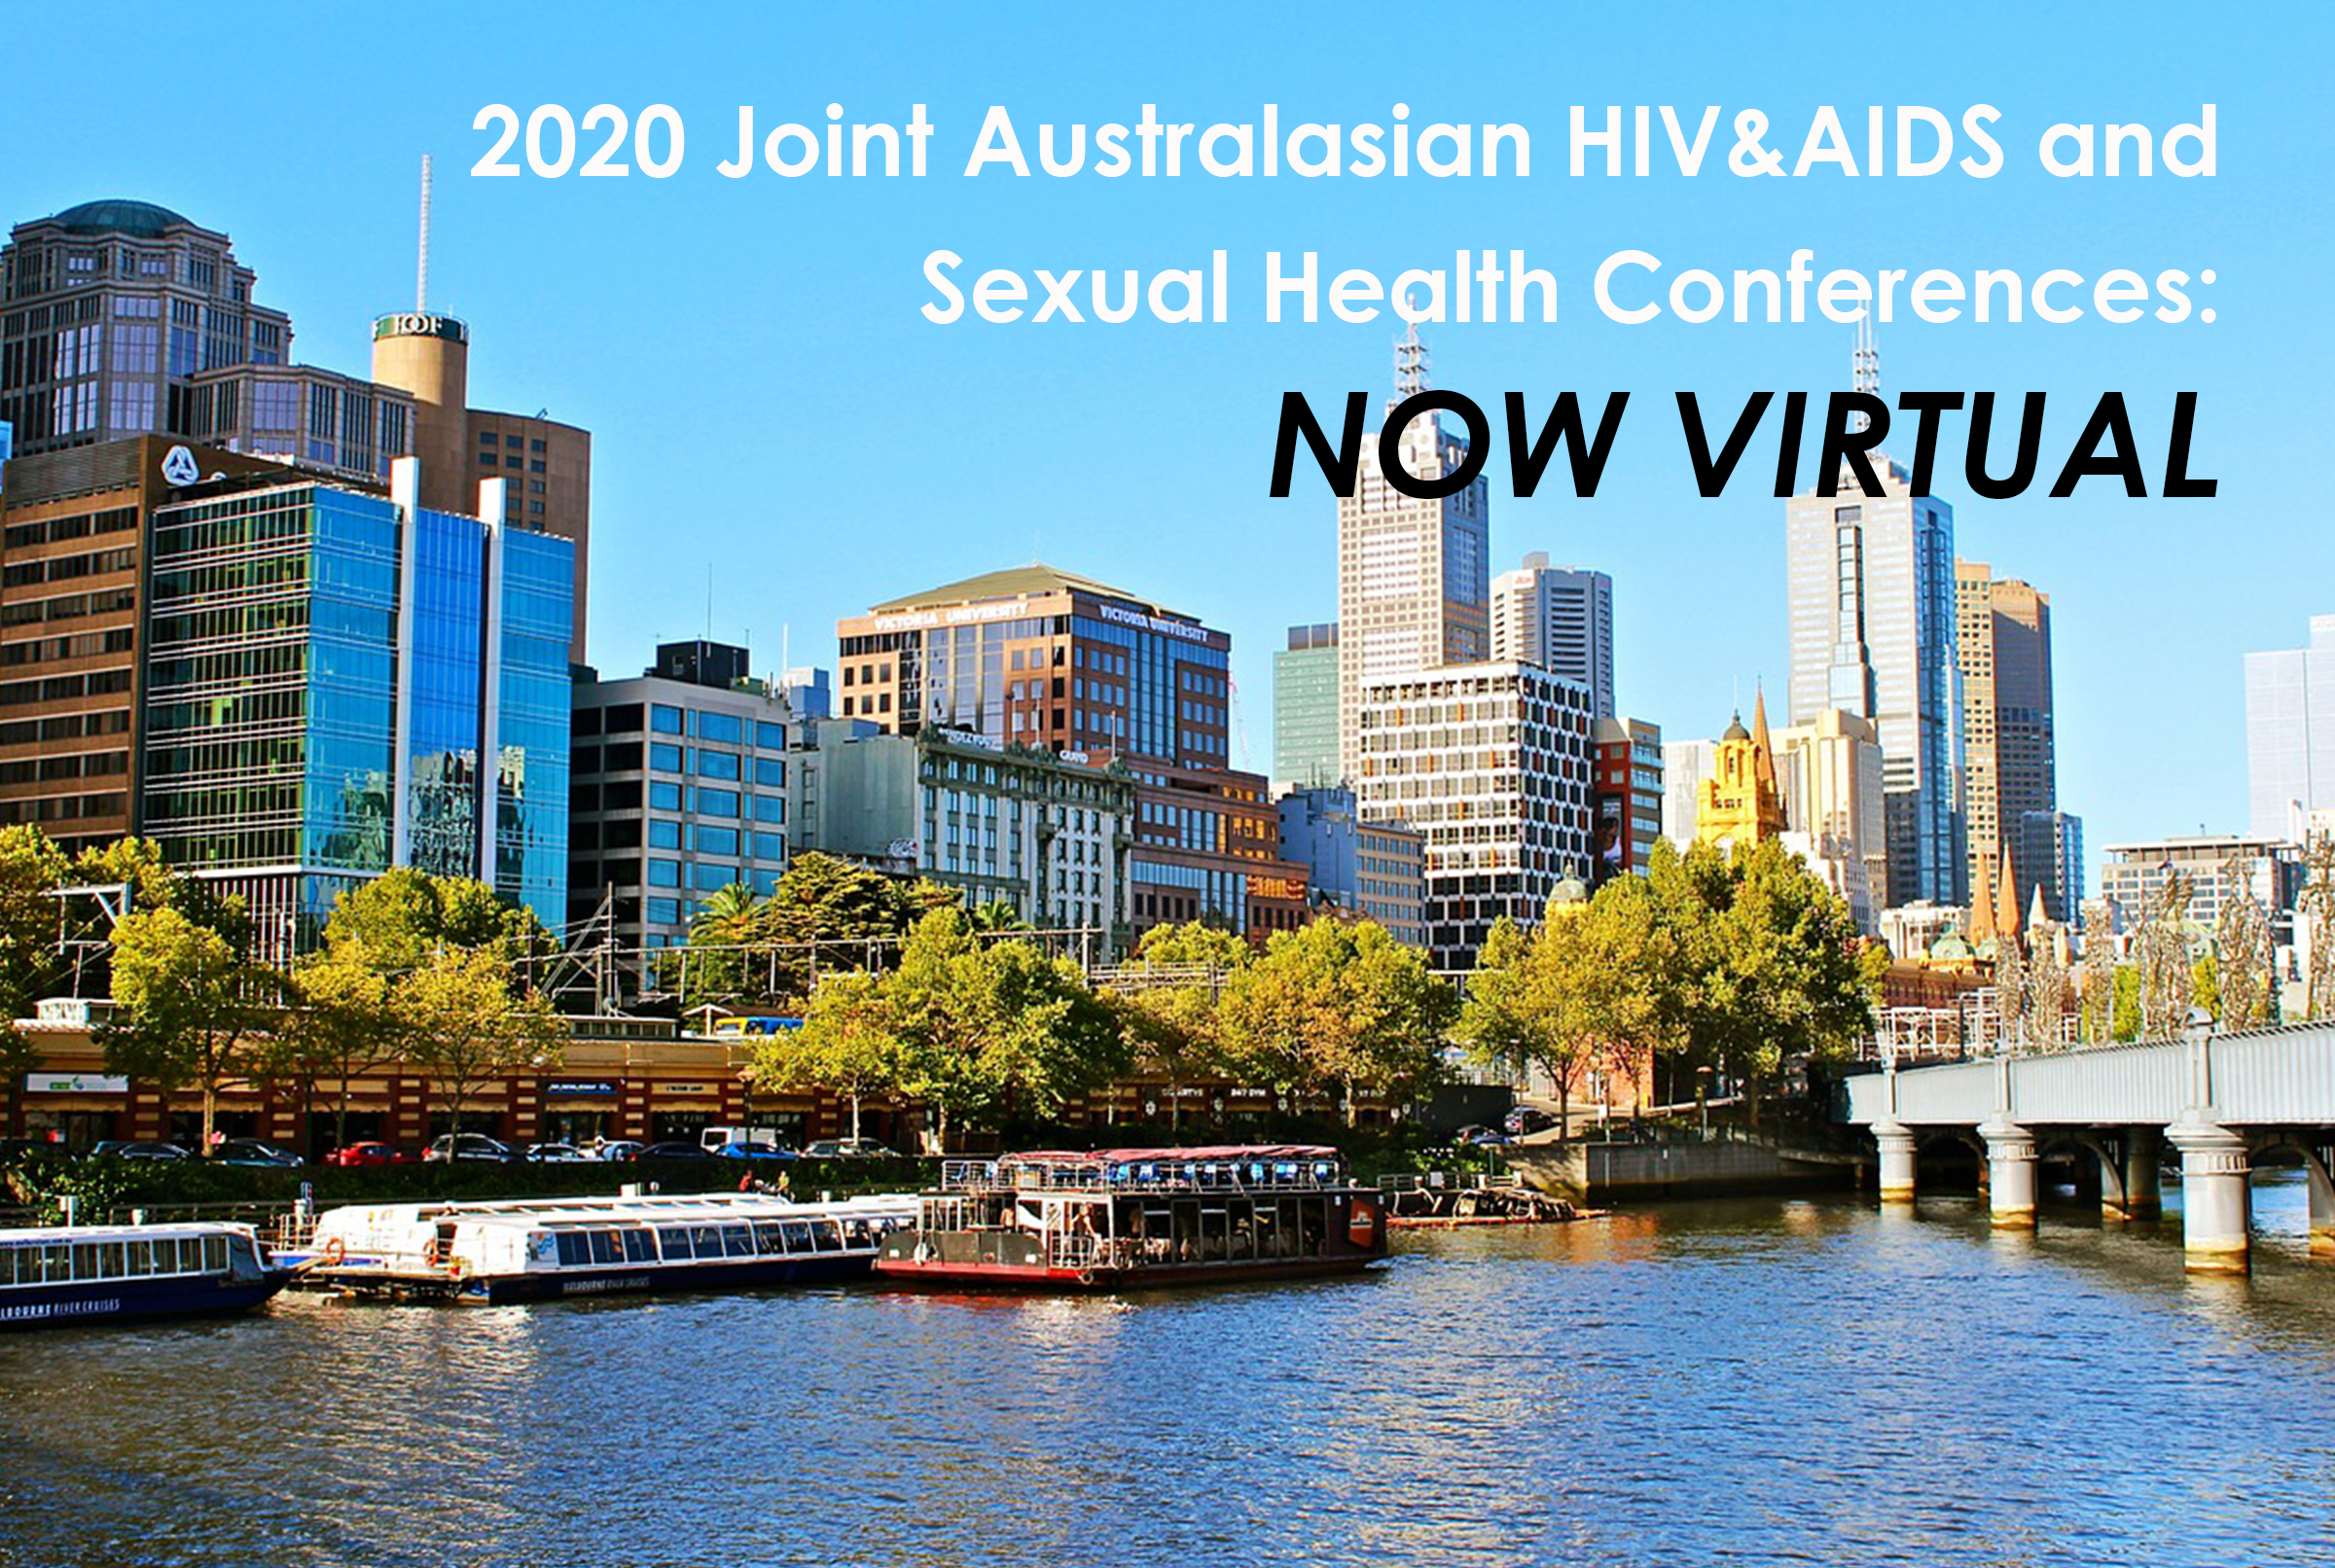 2020 Joint Australasian HIV&AIDS and Sexual Health Conferences: NOW VIRTUAL